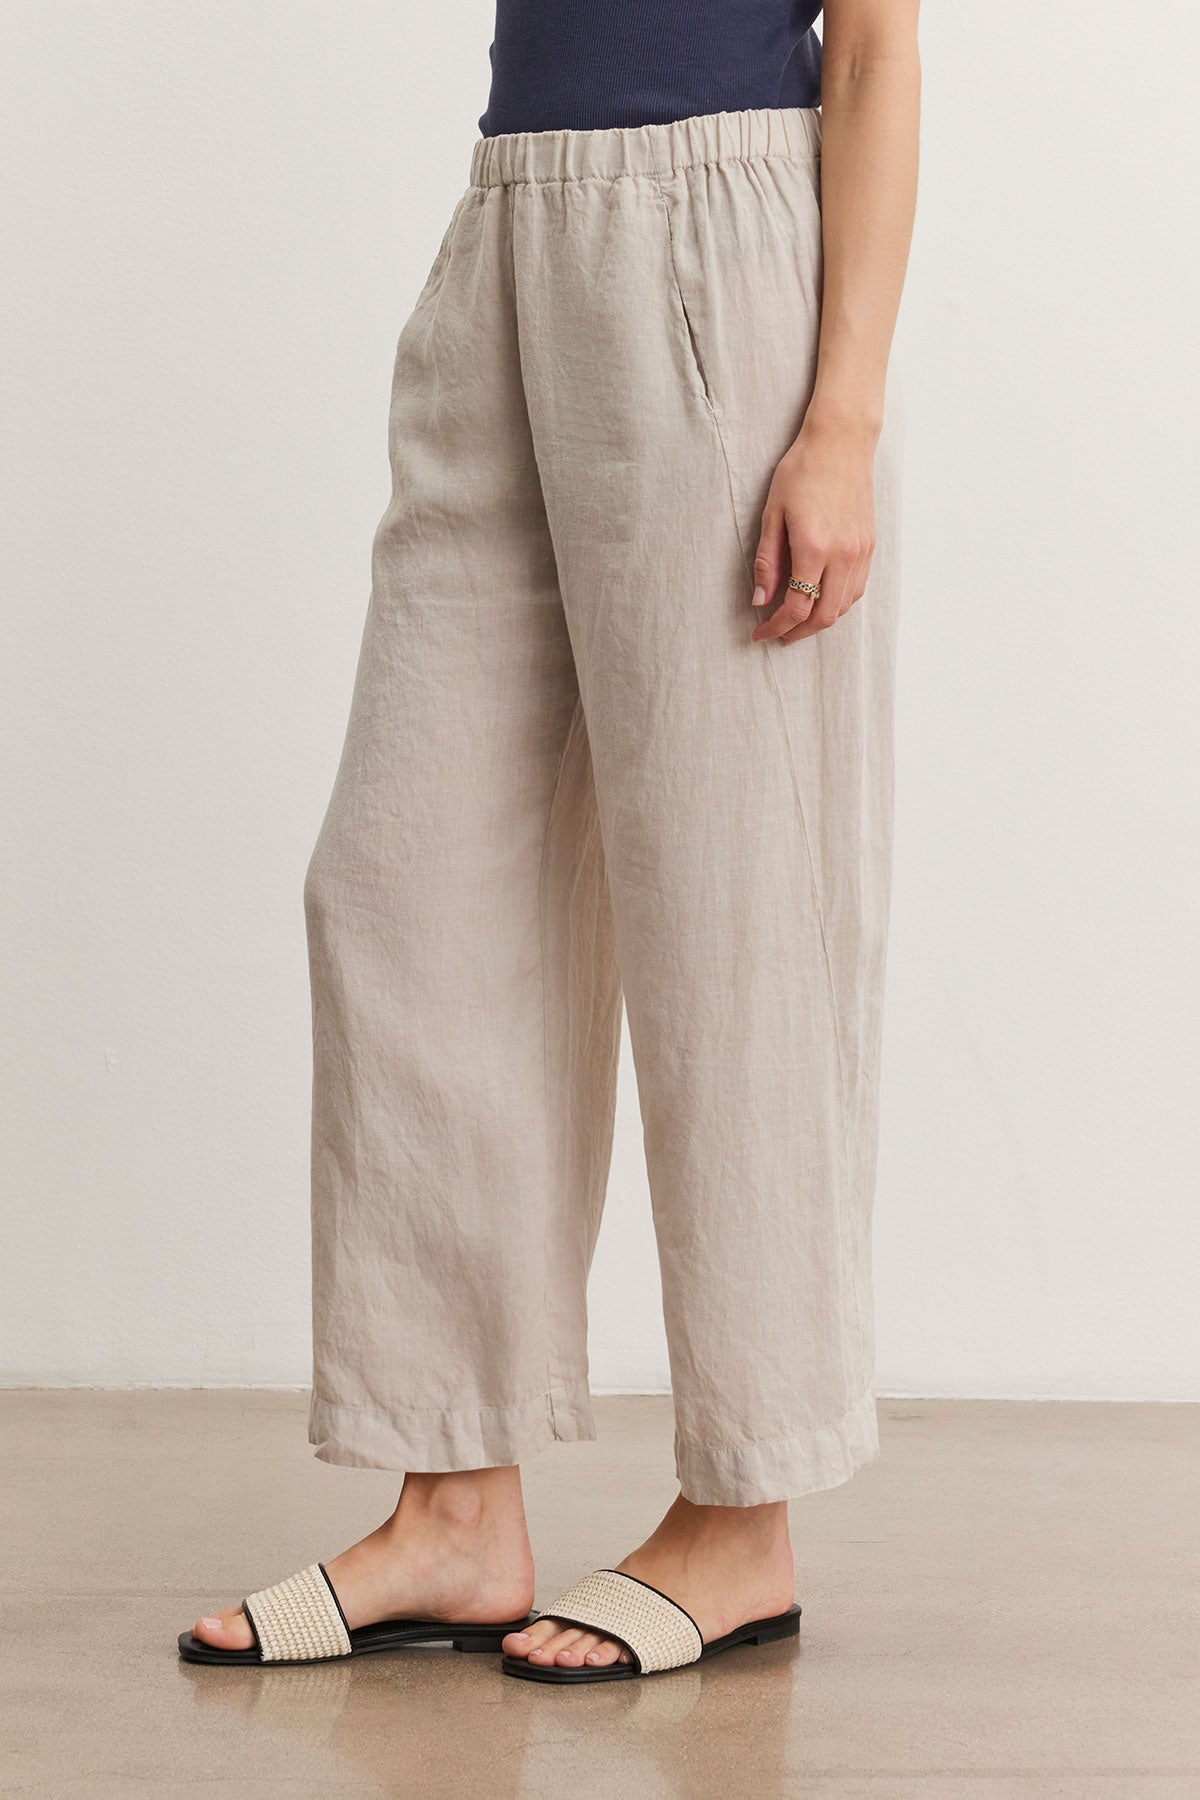 Person wearing Velvet by Graham & Spencer's LOLA LINEN PANT with pockets, a dark-colored top, and black-and-beige sandals. They are standing on a light-colored floor, with the focus on the lower half of their body.-36998848381121